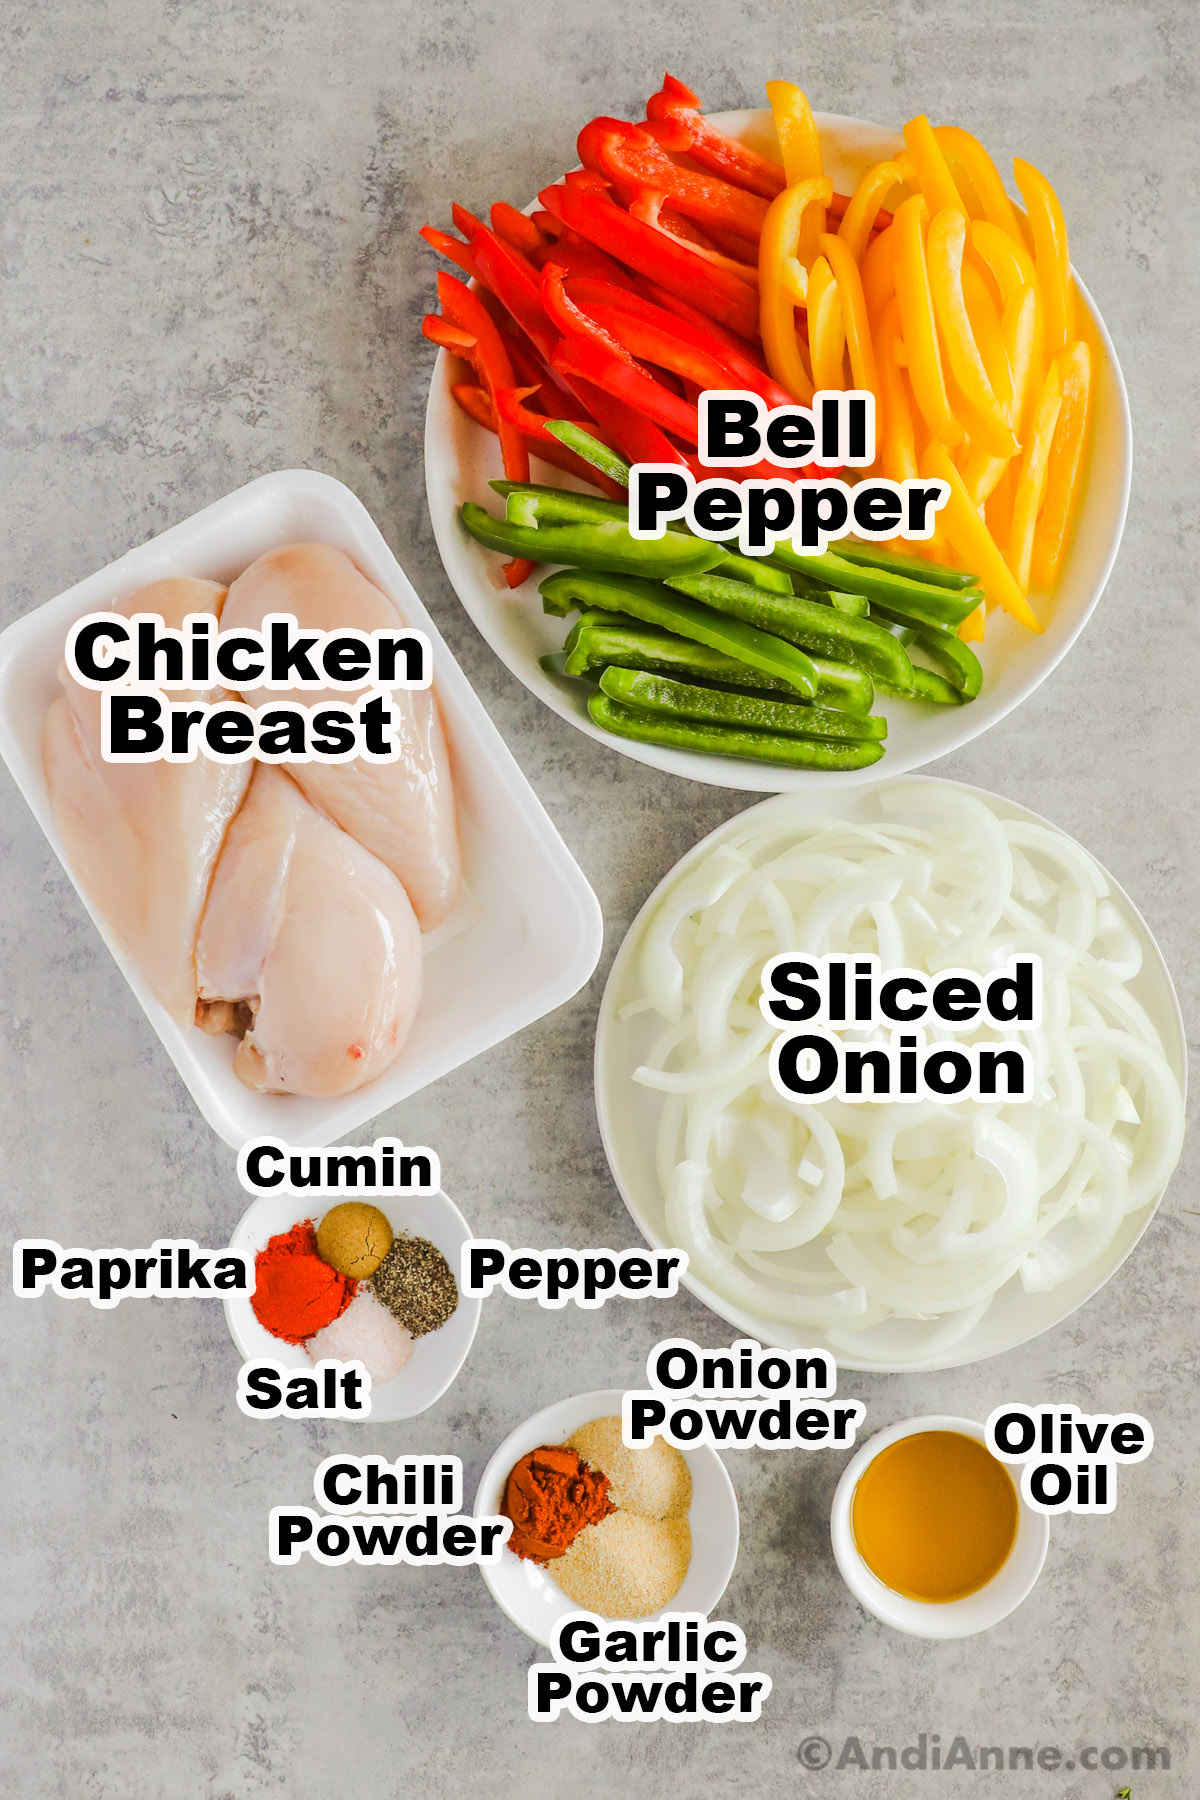 Recipe ingredients on plates and in bowls including sliced red, green and yellow bell pepper, 3 raw chicken breasts, sliced onion, various spices and olive oil.